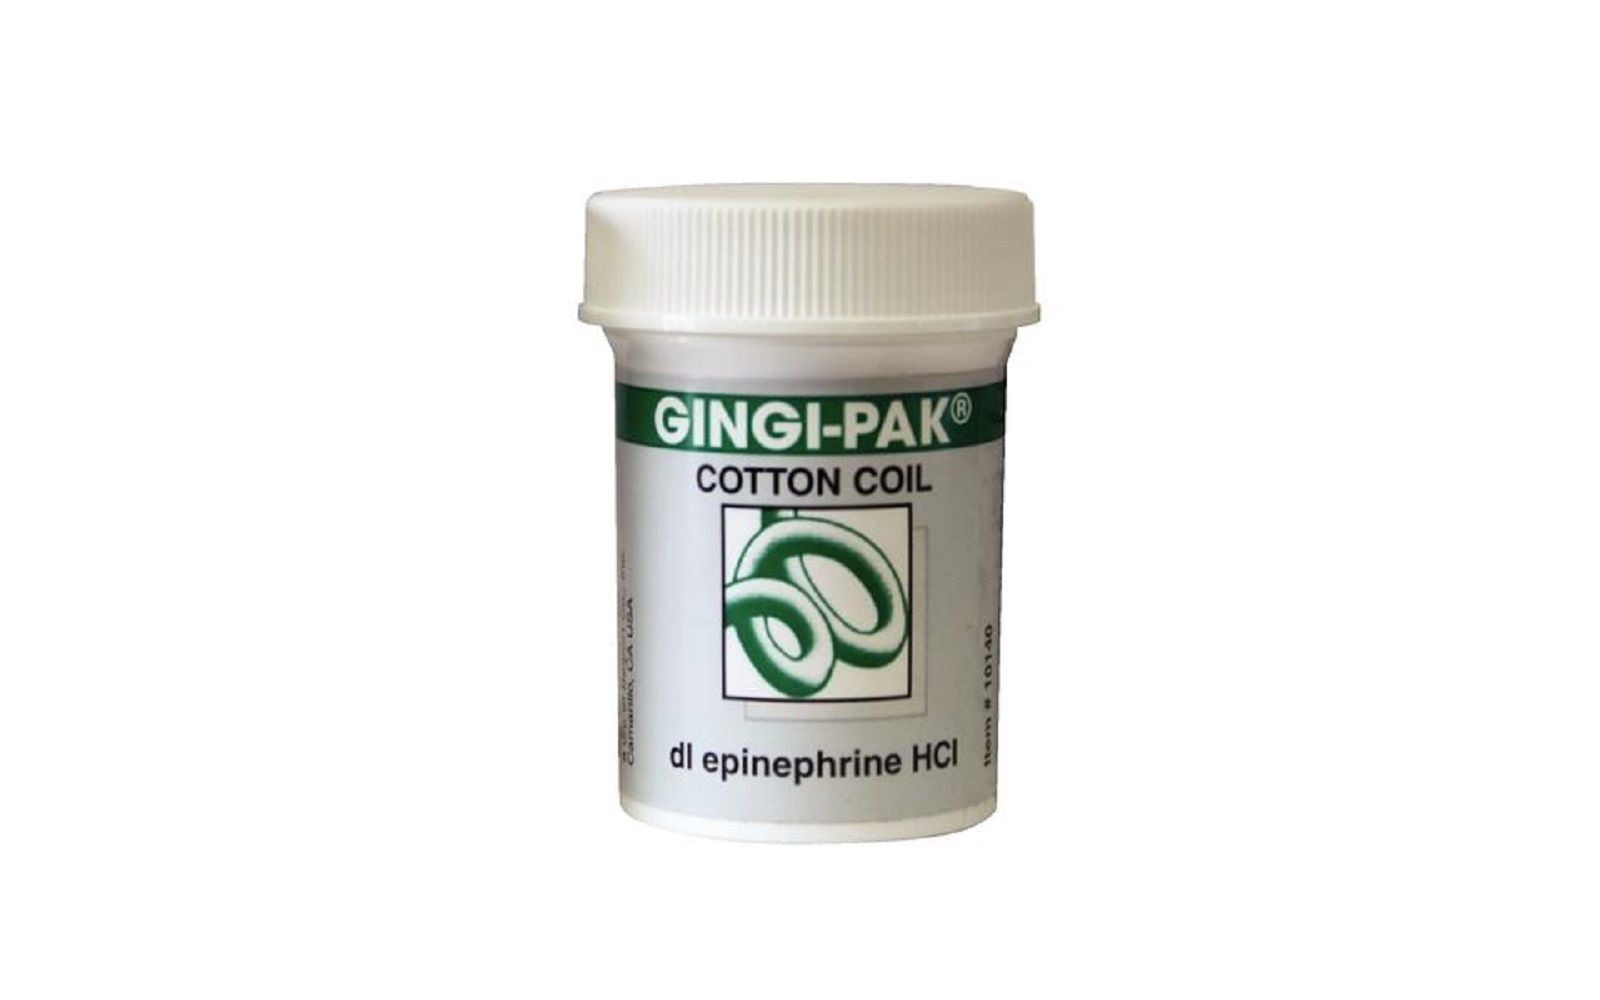 Gingi-pak® cotton coil with dl epinephrine hcl – 15 ml